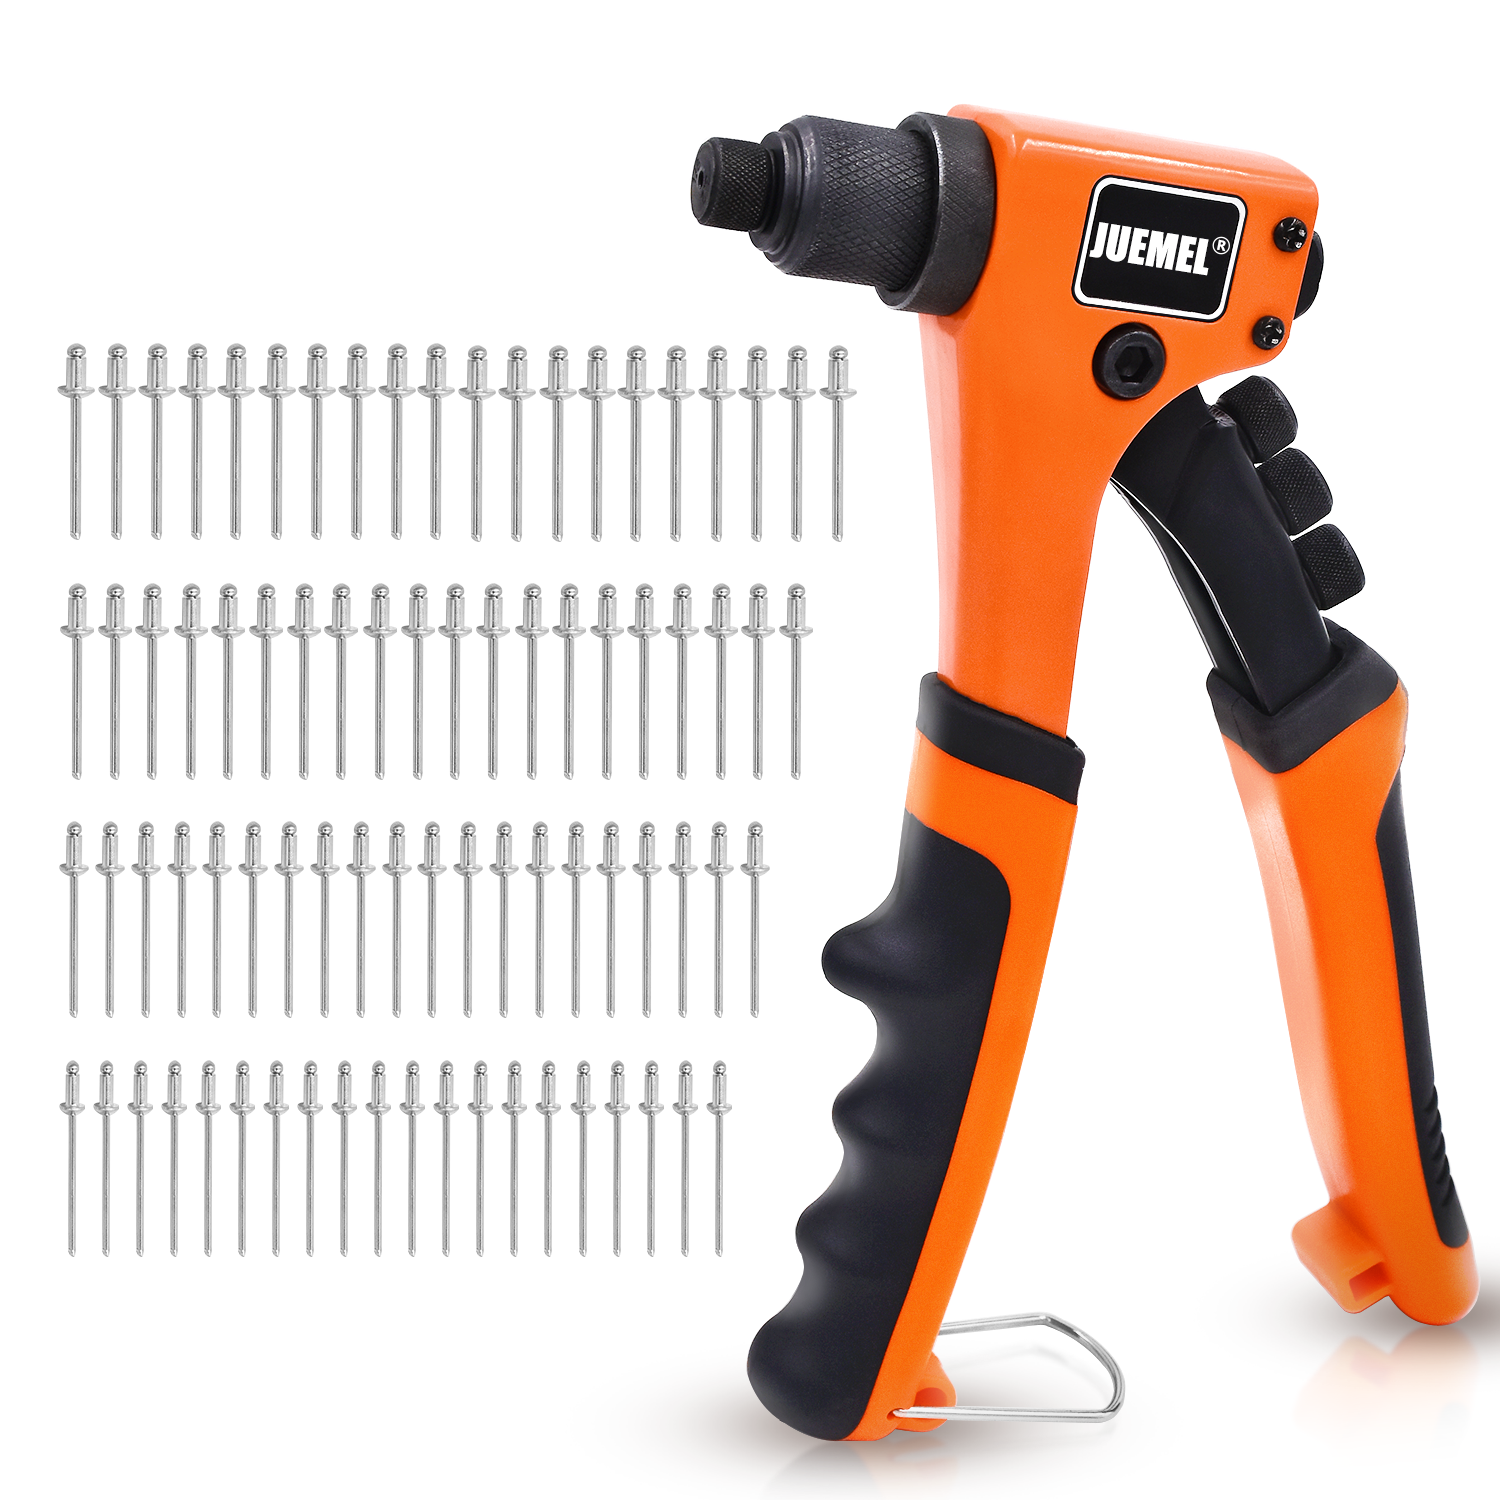 Rivet Gun Kit with 80 Pcs Rivets, JUEMEL Hand Riveter Set, 4 Sizes of Rivet heads Attached, Heavy Duty Durable Single Hand Rivet Gun Tool for Metal, Plastic and Leather